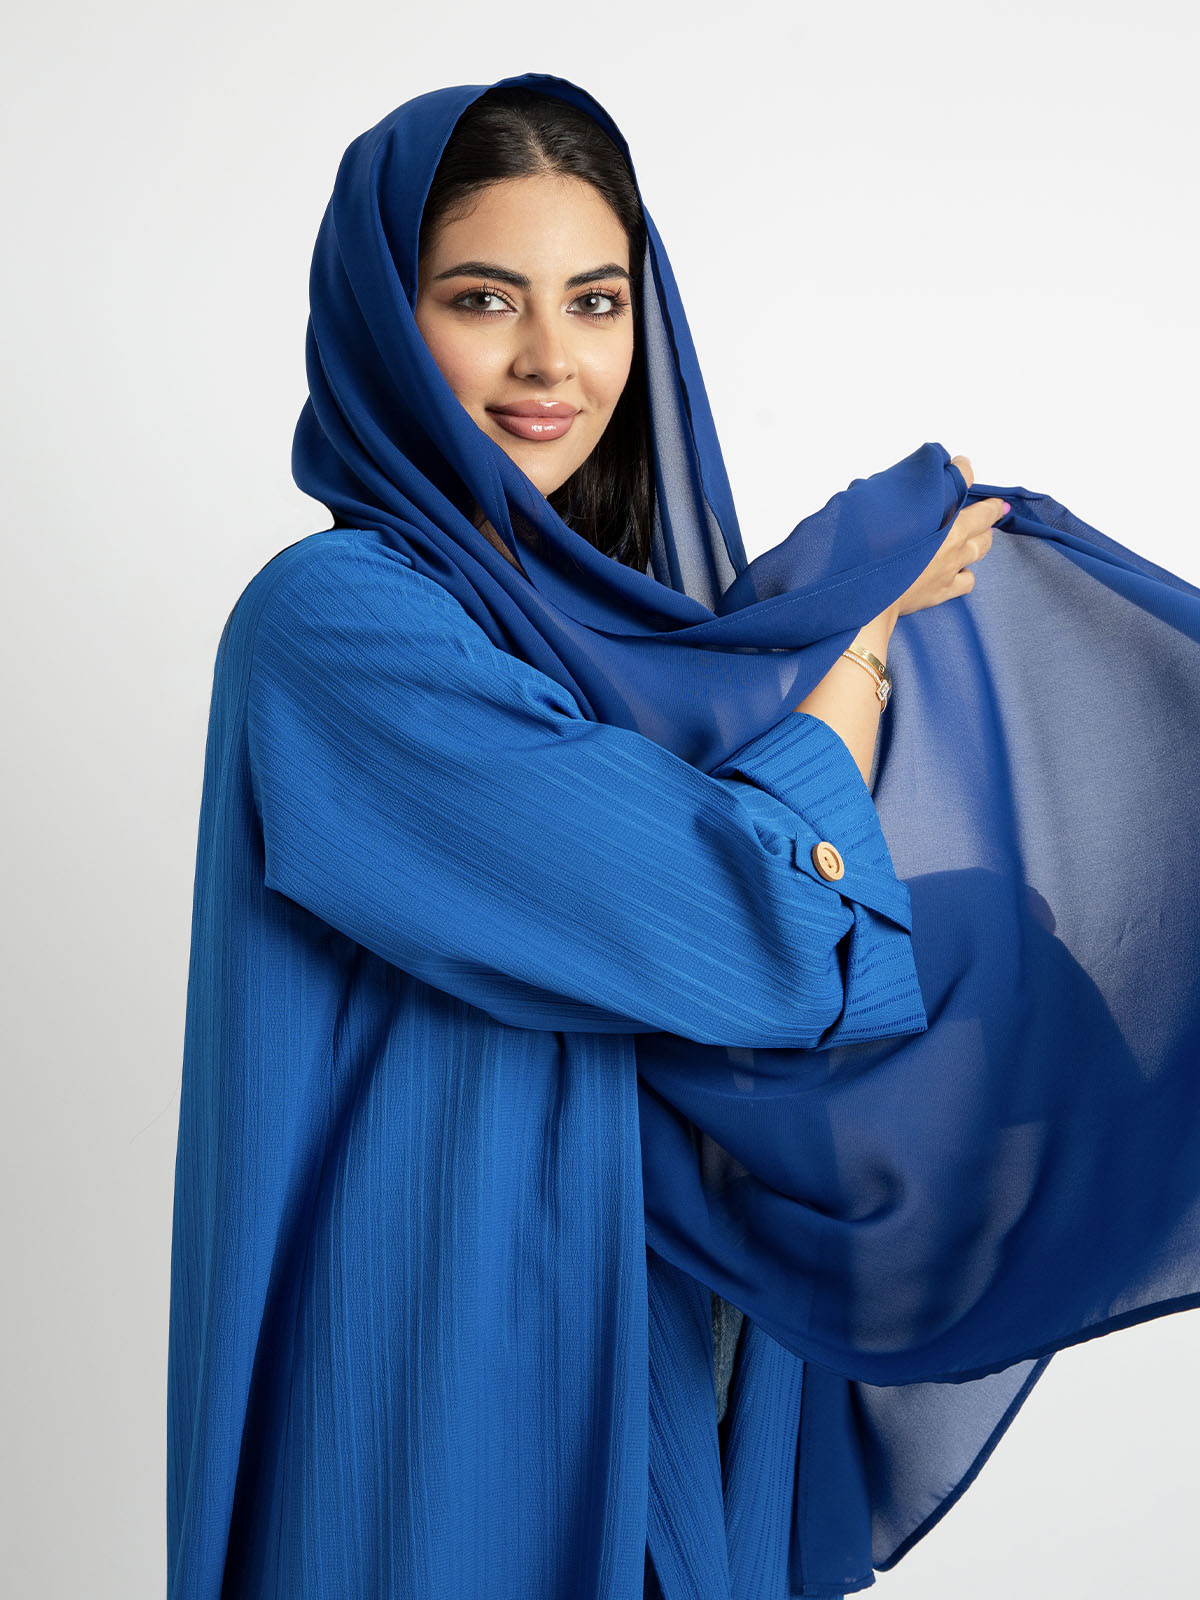 Kaafmeem women clothing regular fit neon blue comfy long abaya for everyday in wrinkle free fabric for work or outings